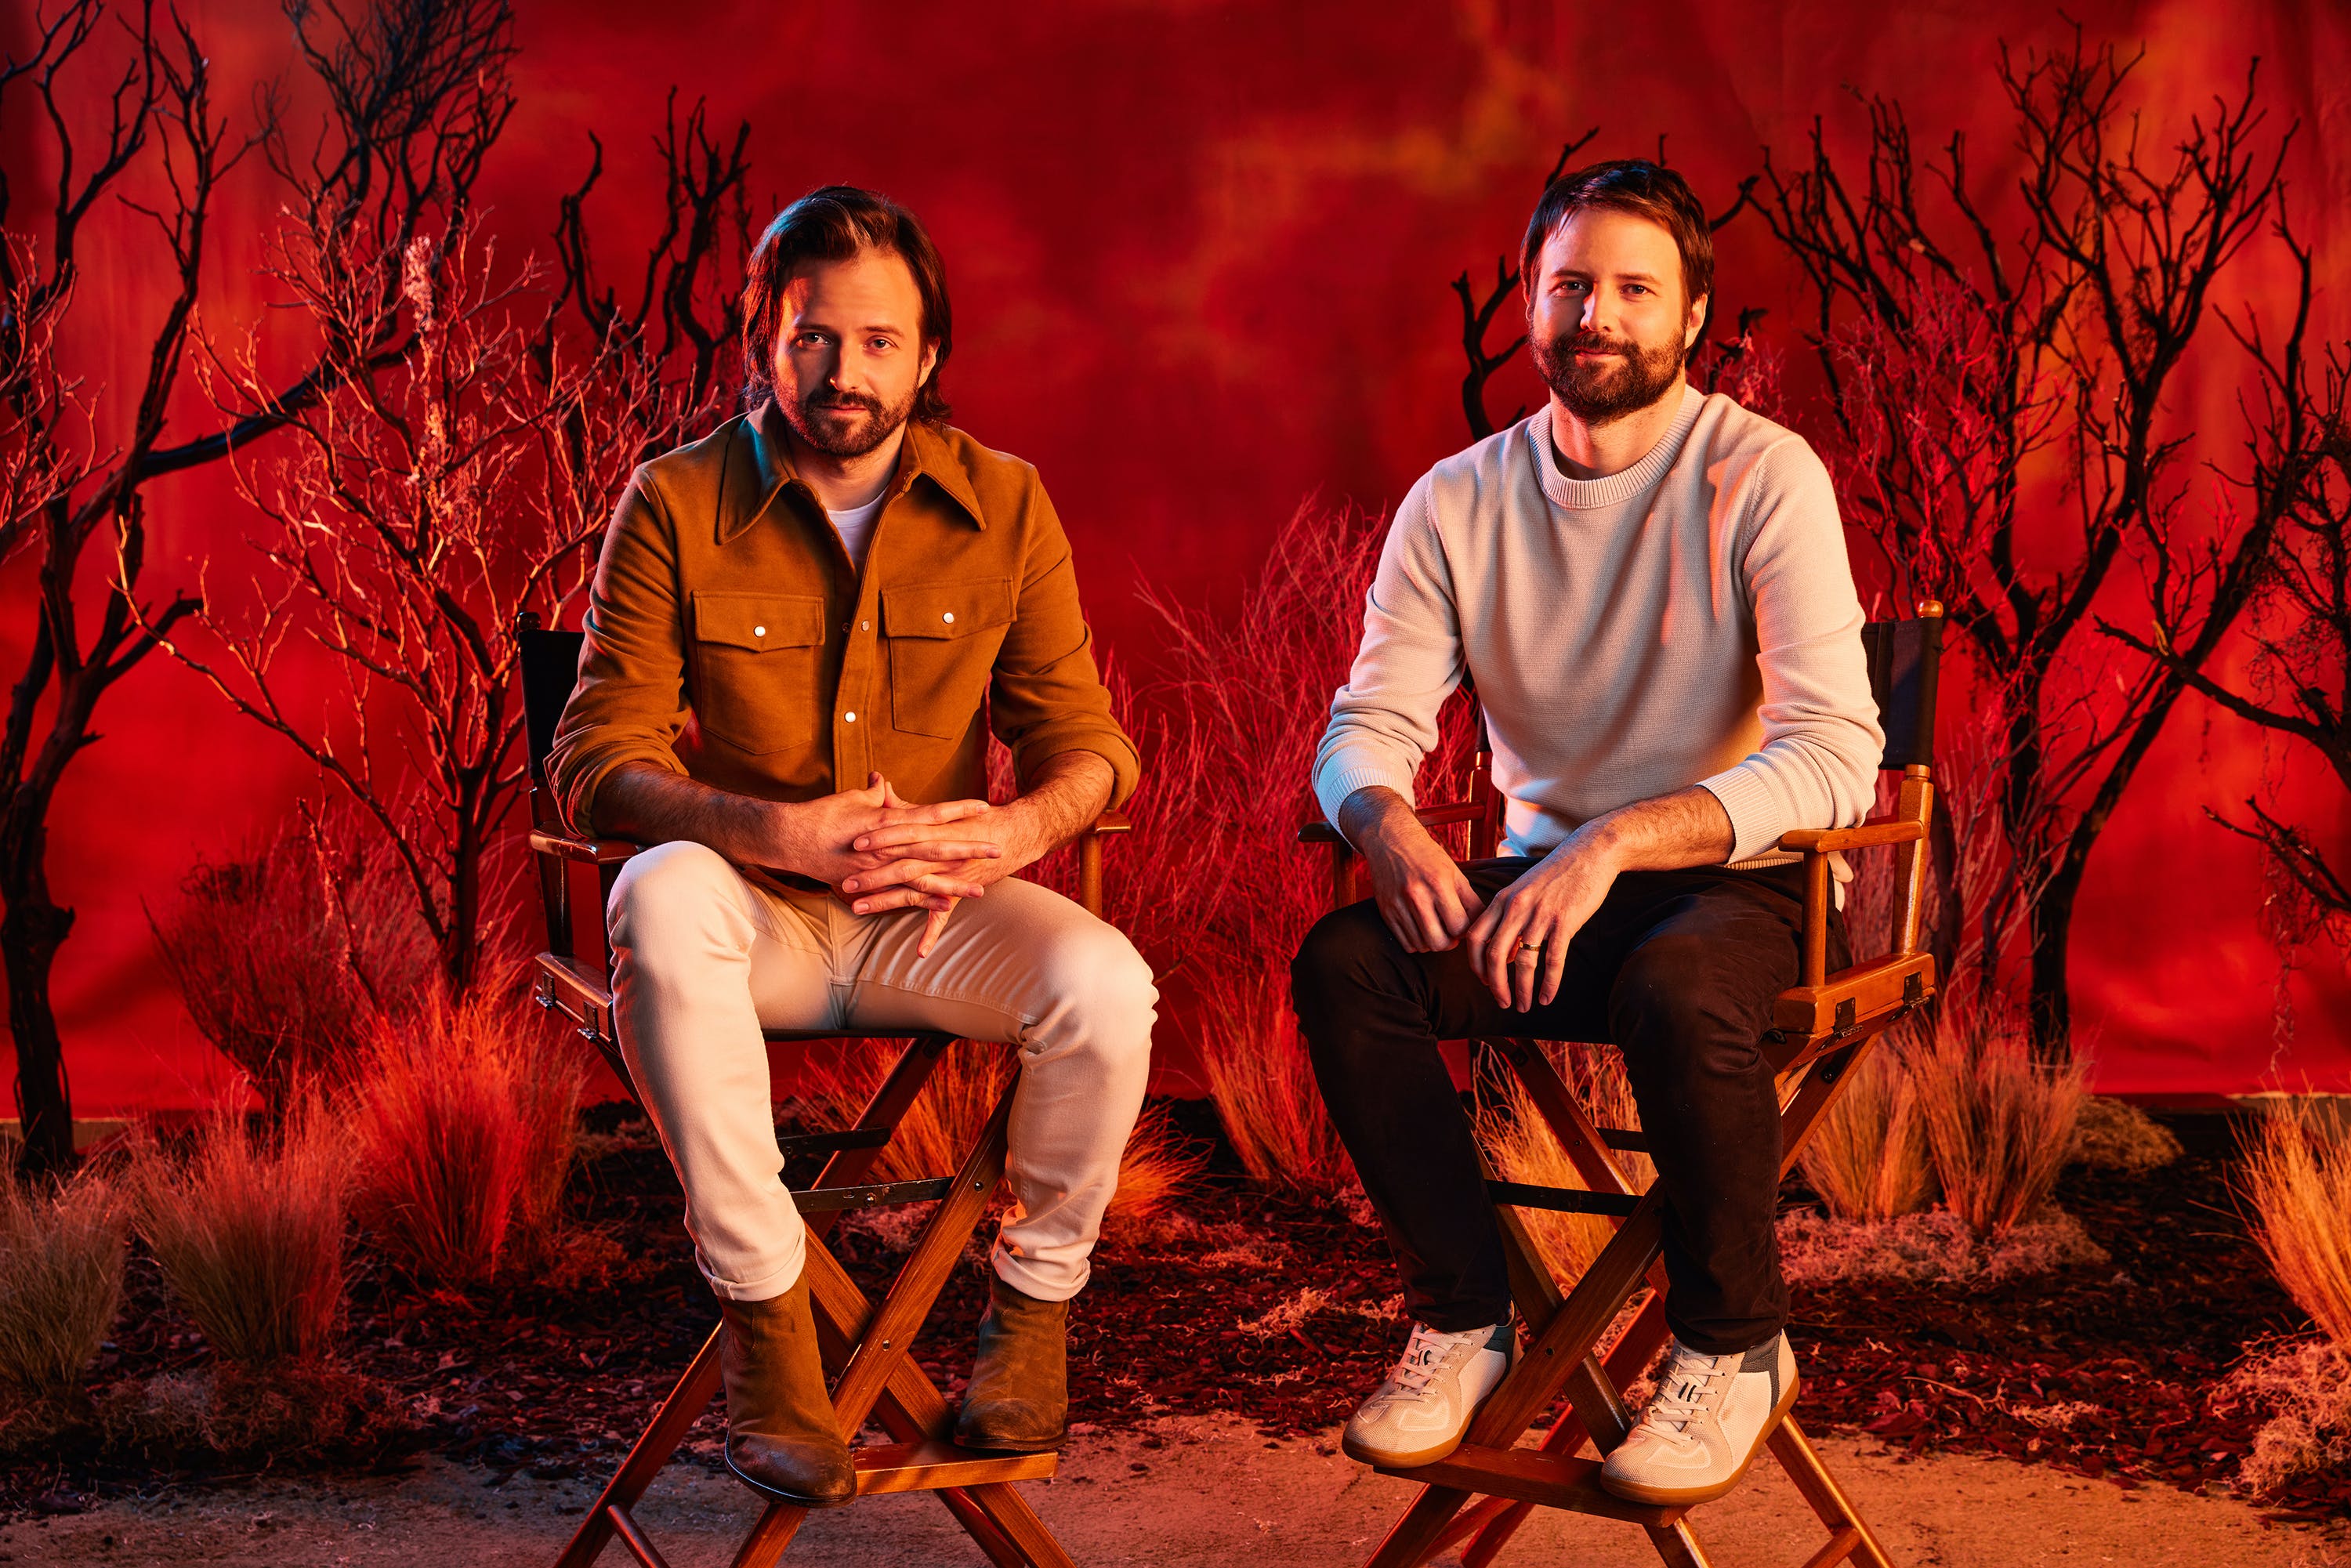 Stranger Things' Duffer brothers reveal they've retconned episodes